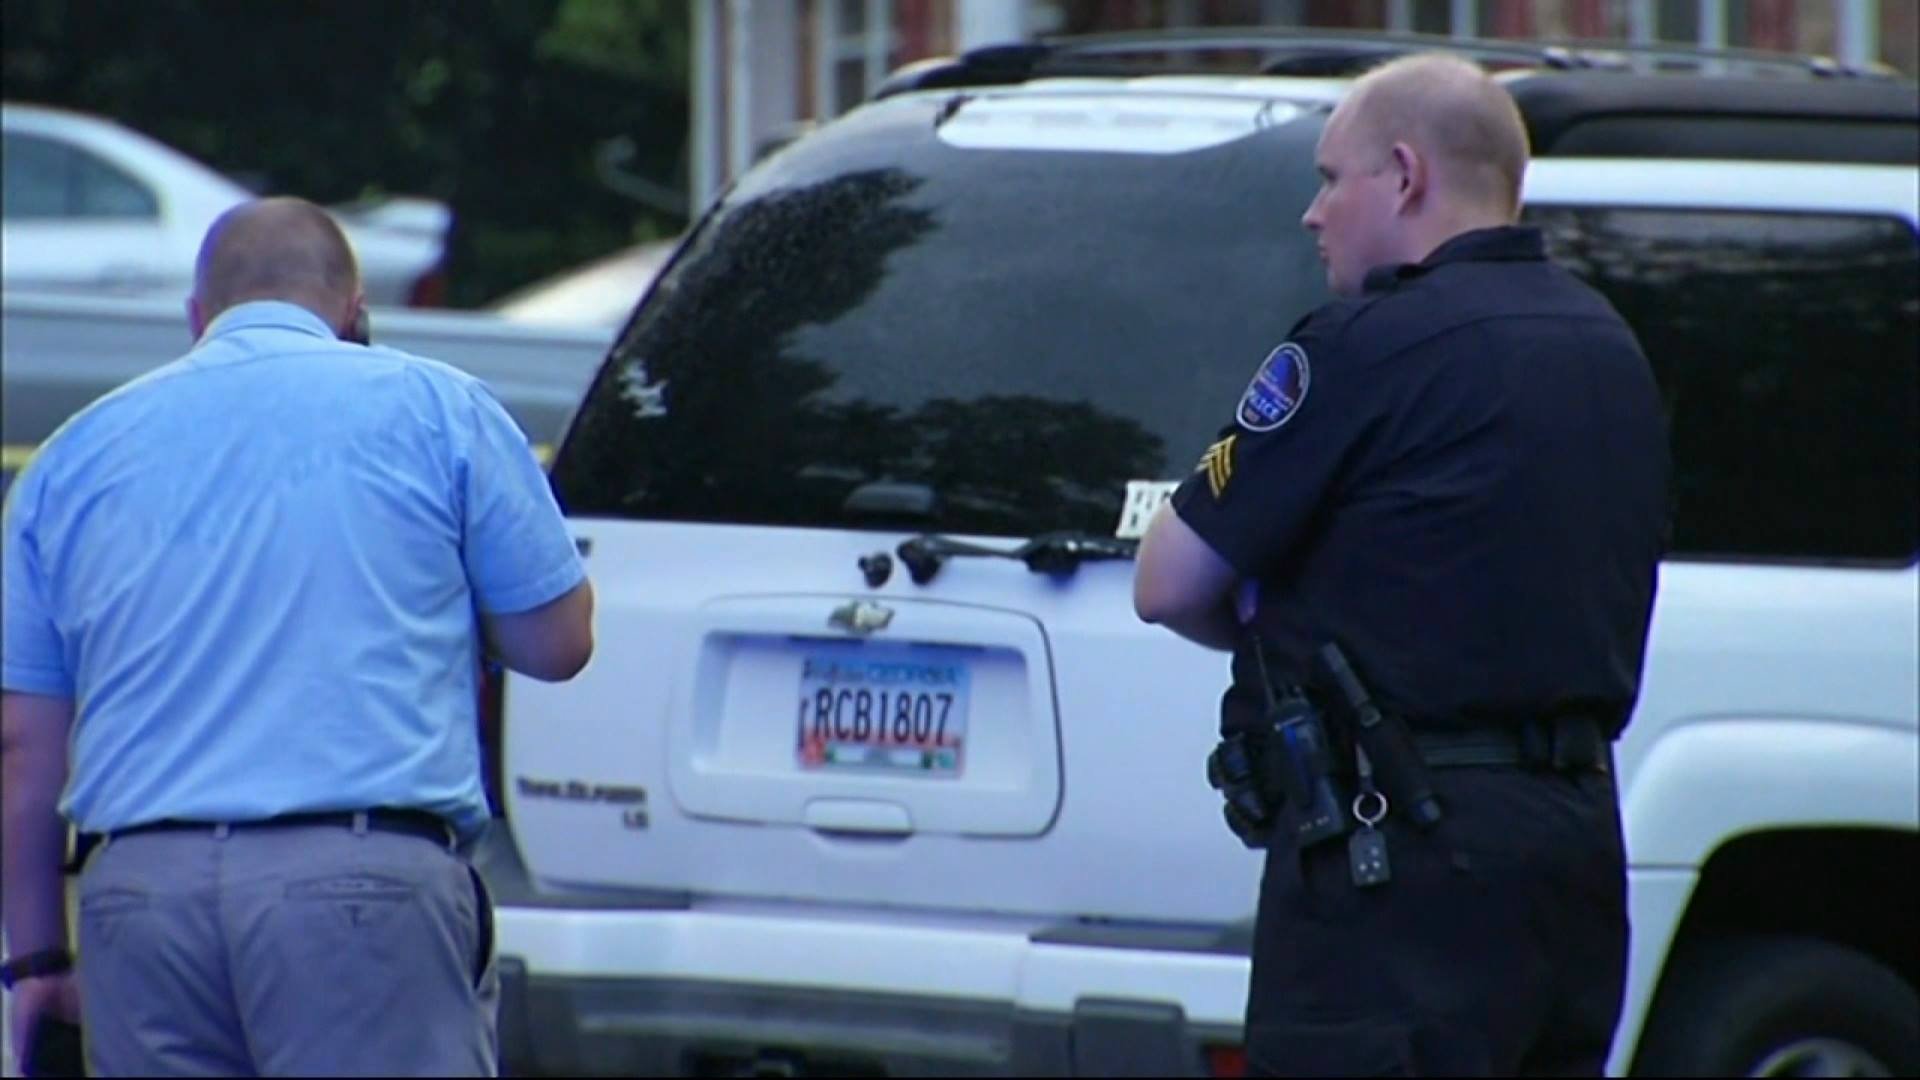 A man is under arrest in Carrollton, Georgia, west of Atlanta, after his 15 month old twin girls were found in a hot car. Both girls died, Carrollton, Georgia, Aug. 5, 2016 | Photo courtesy of WSB via The Associated Press, St. George News